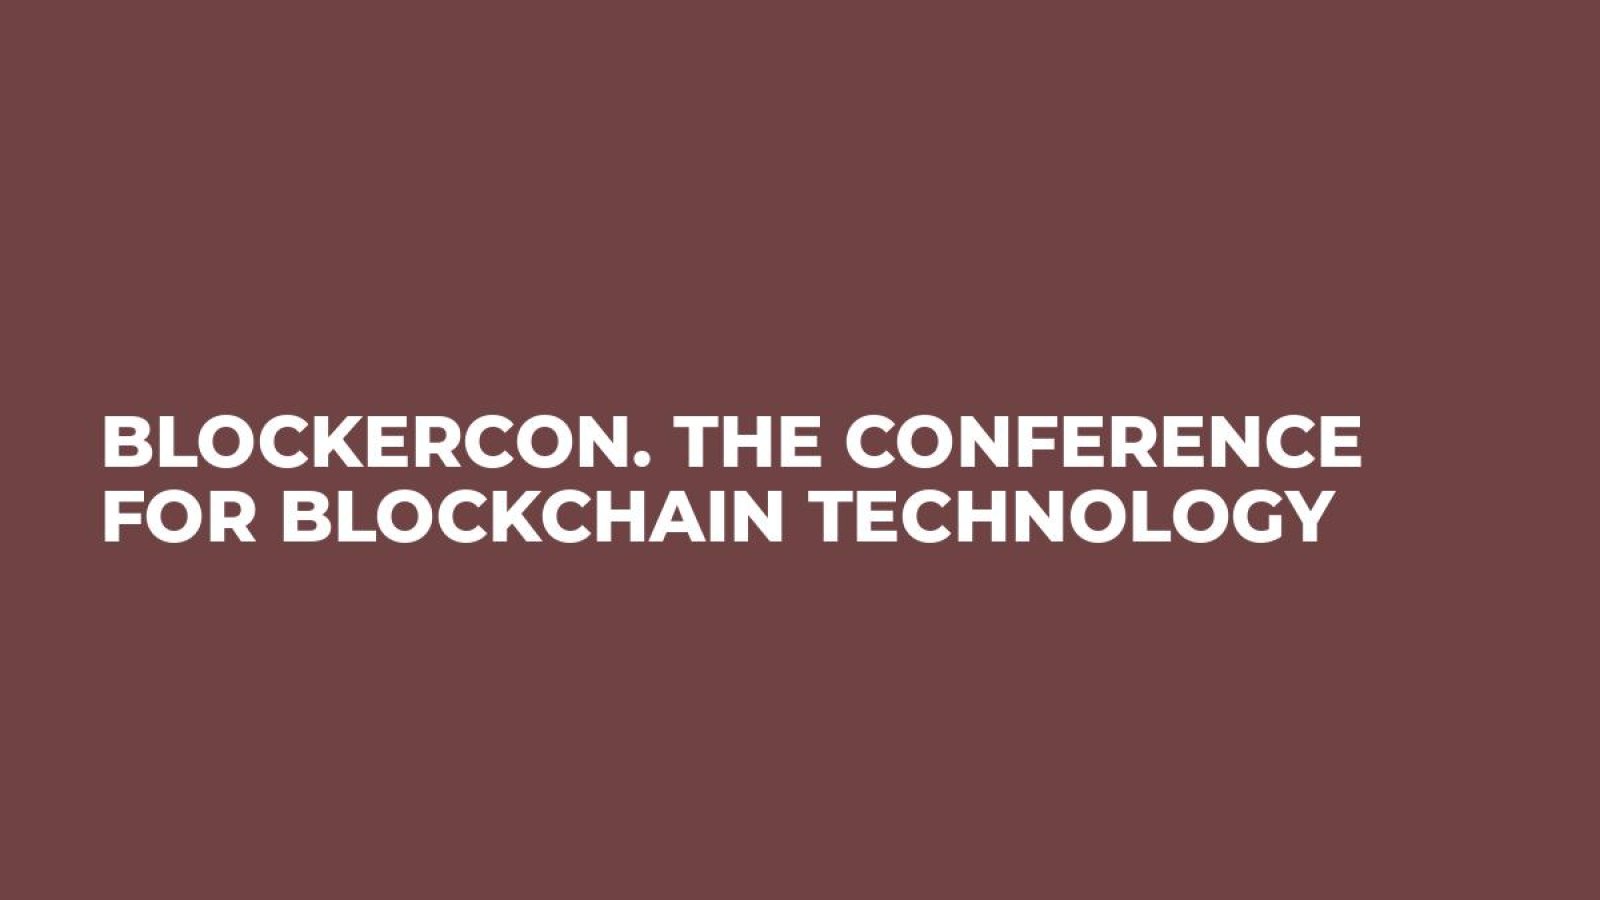 BLOCKERCON. The conference for blockchain technology